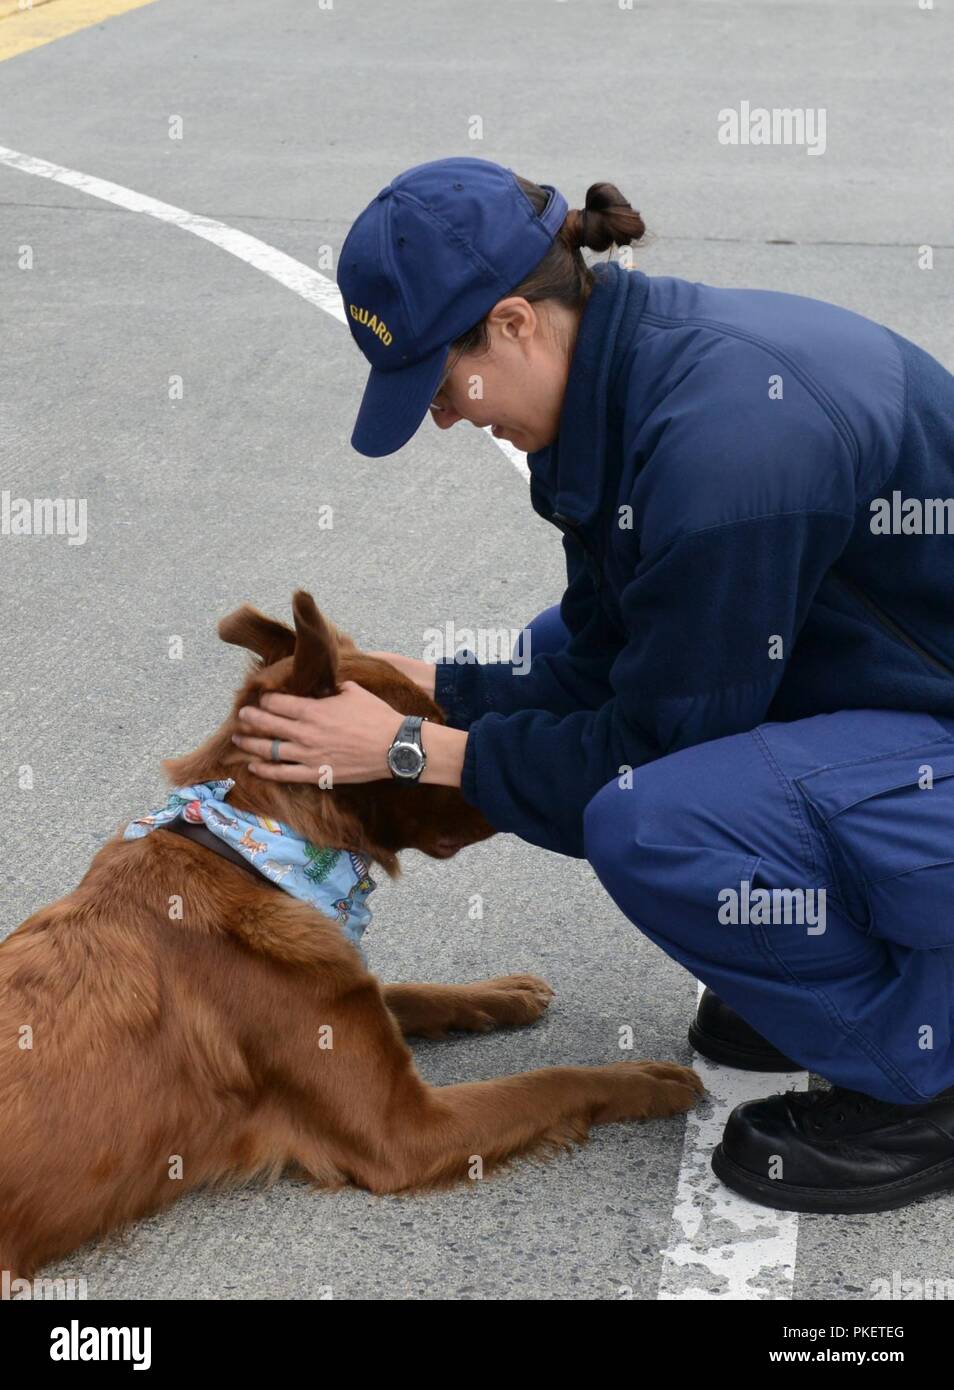 A crew member aboard the Coast Guard Cutter Alex Haley (WMEC 39) pets a dog on the pier in Kodiak, Alaska, August 1, 2018. The crew members aboard the Alex Haley are returning from a 90-day deployment, patrolling more than 16,000 miles throughout the Pacific Ocean. U.S. Coast Guard Stock Photo